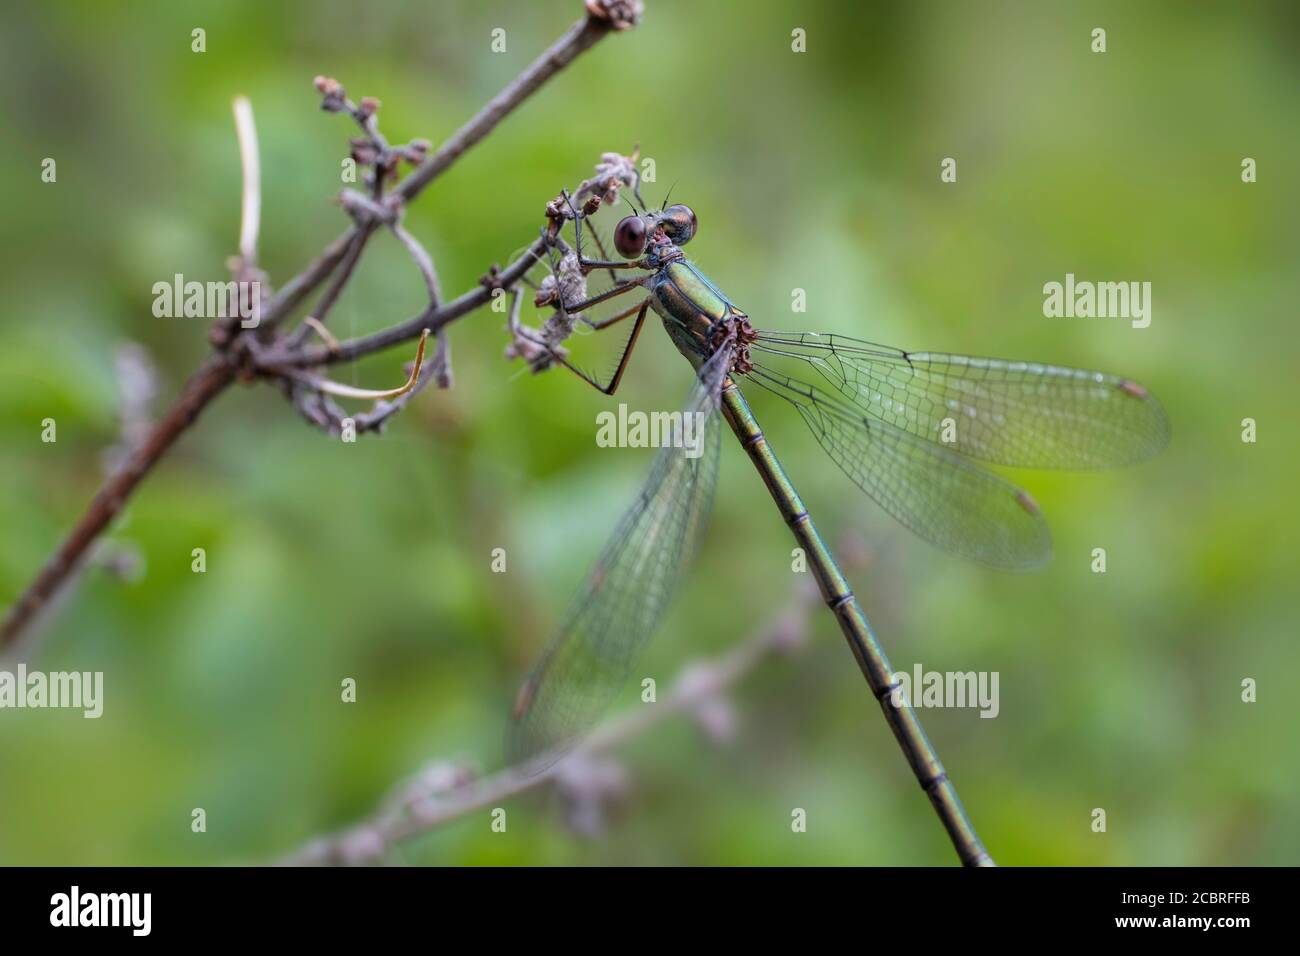 The green Chalcolestes viridis dragonfly perched on a branch. Dragonfly in natural environment. Focus on the head with compund eyes and body Stock Photo